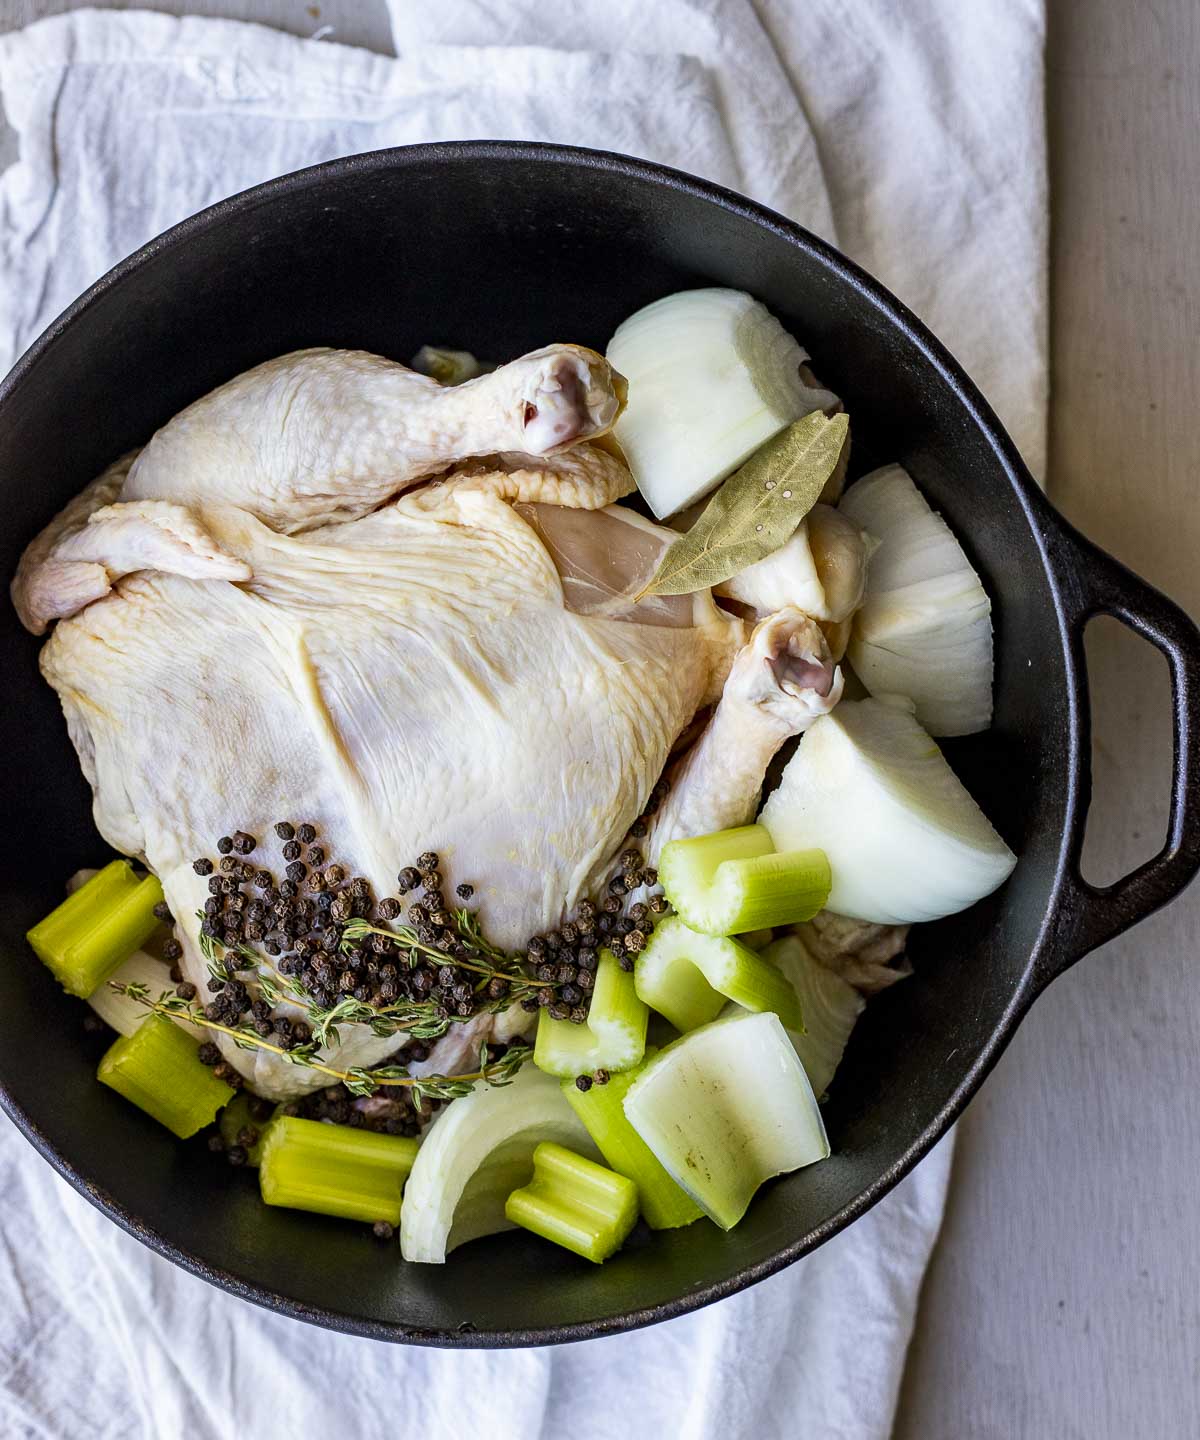 A whole raw chicken with veggies and seasonings in a large dutch oven to make broth.